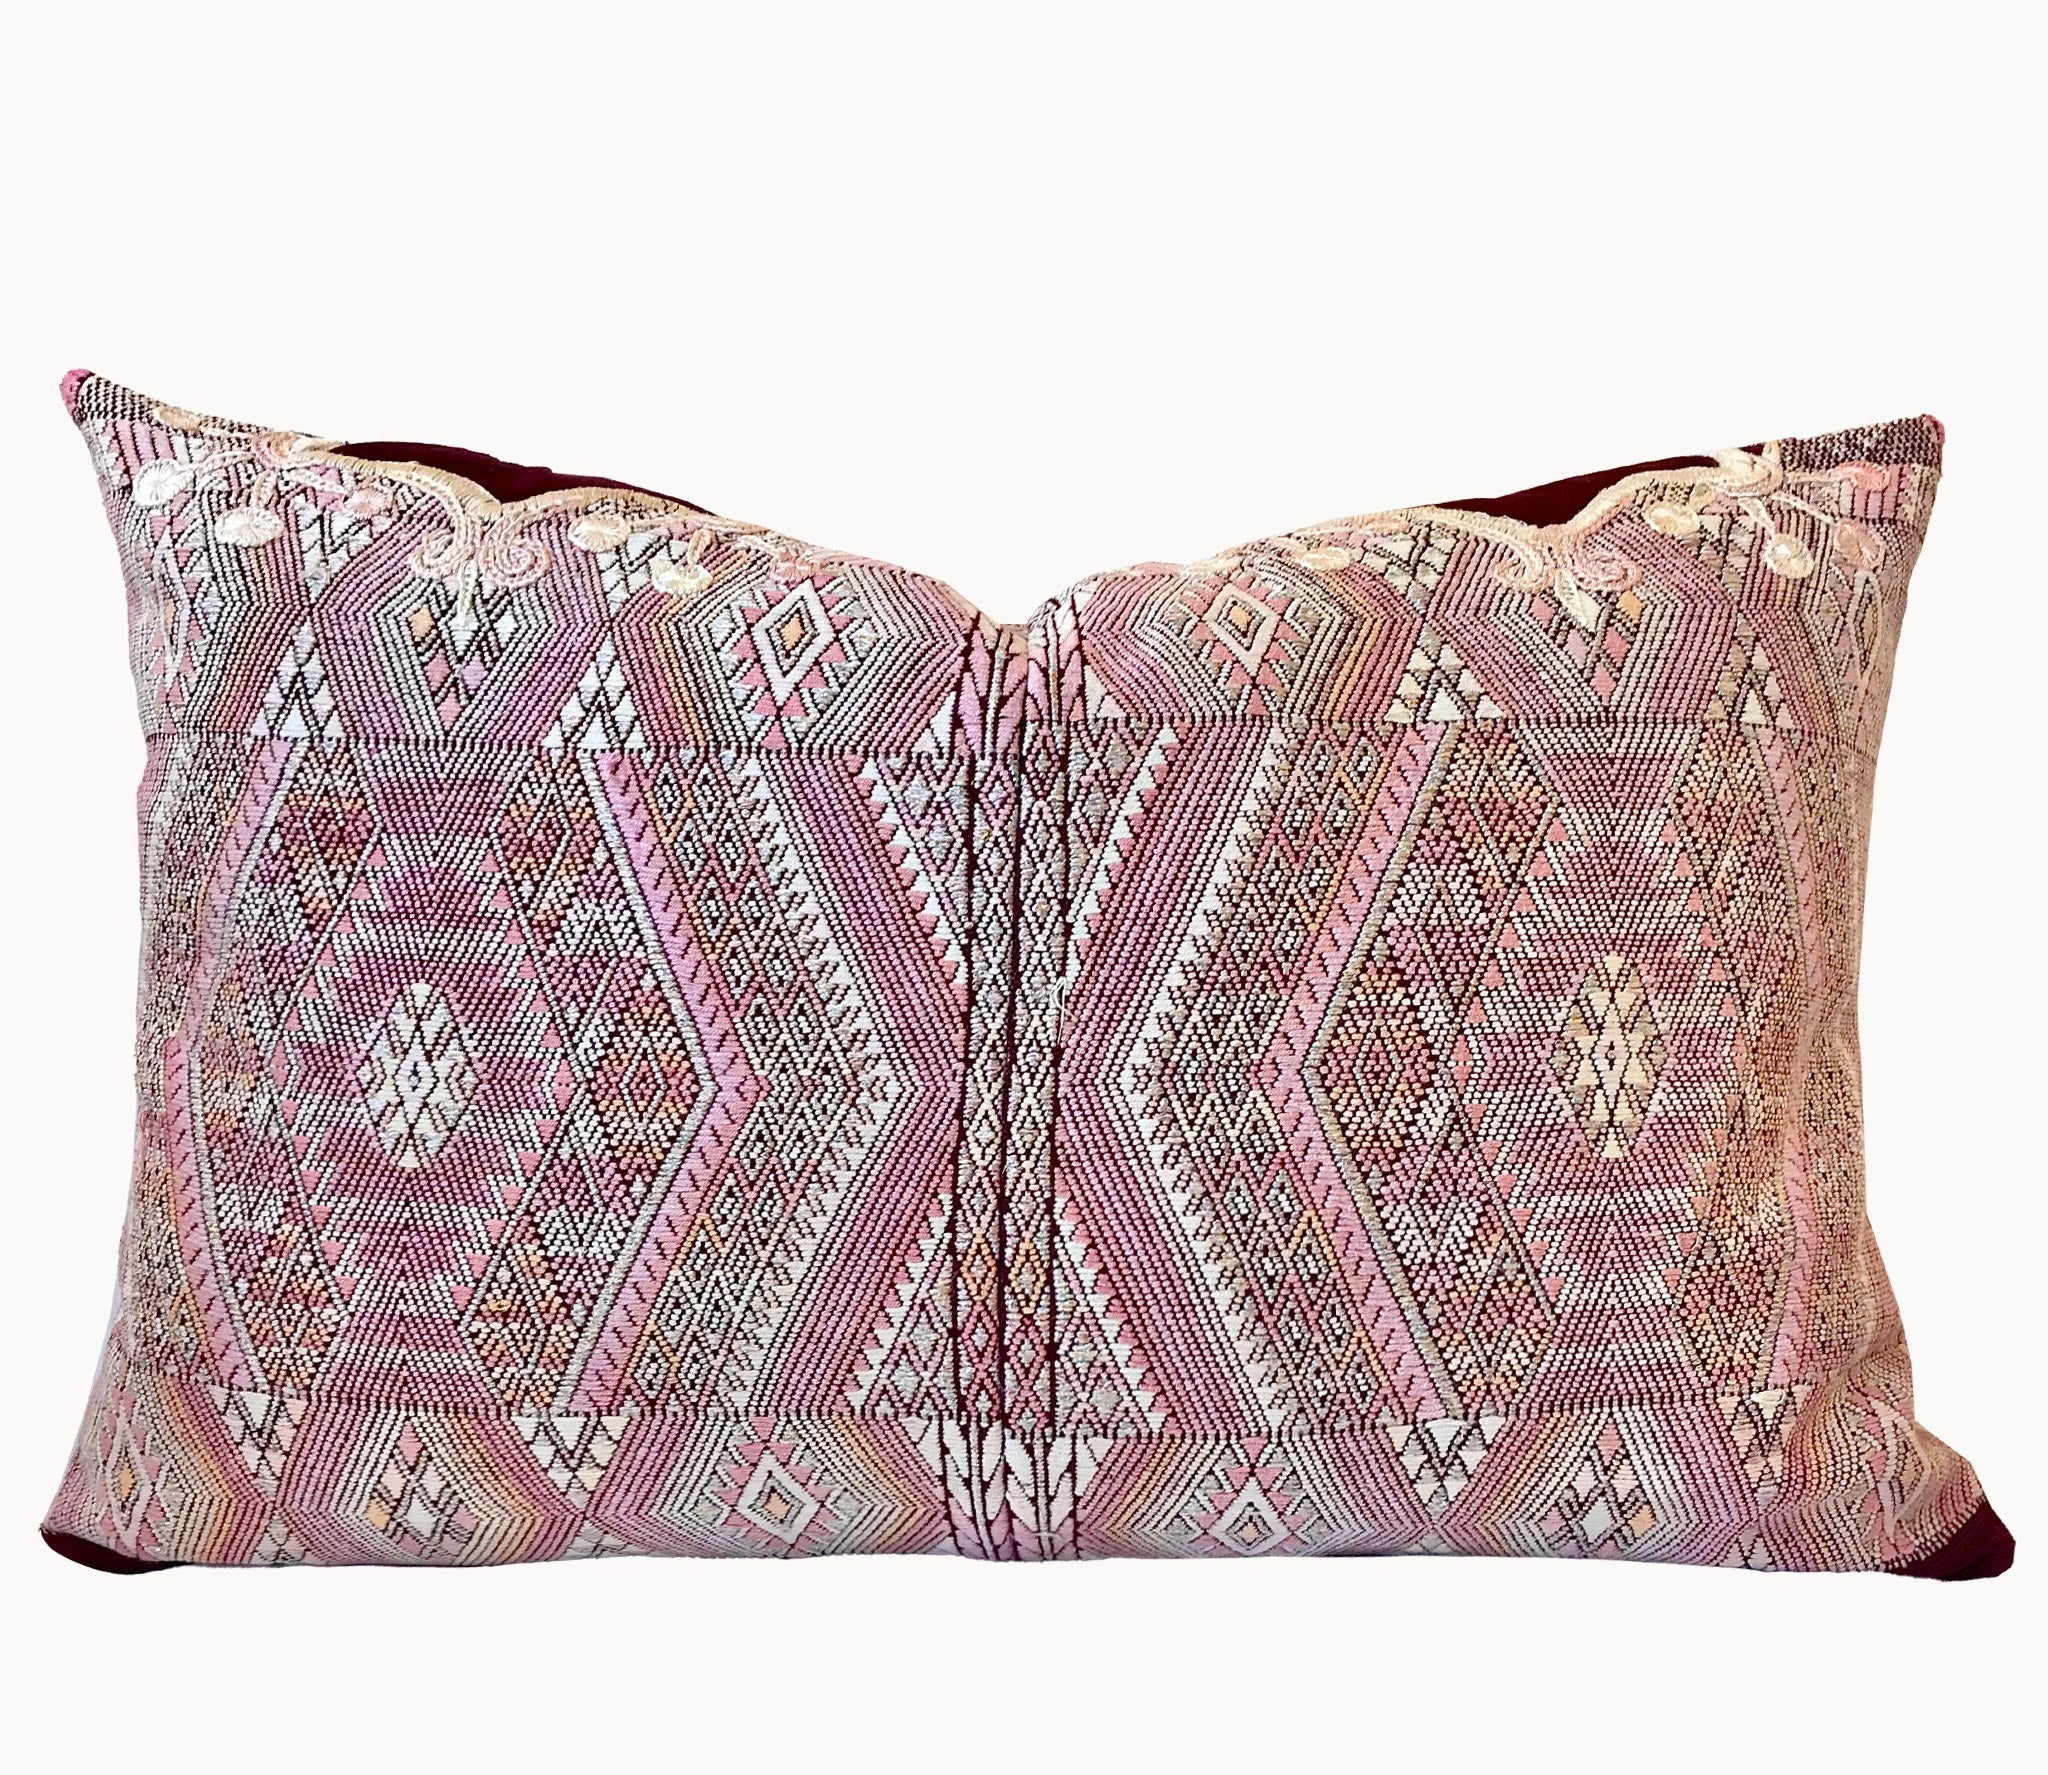 Guatemalan embroidered huipil pillow. Geometric chevron pattern in a pale pink palette.